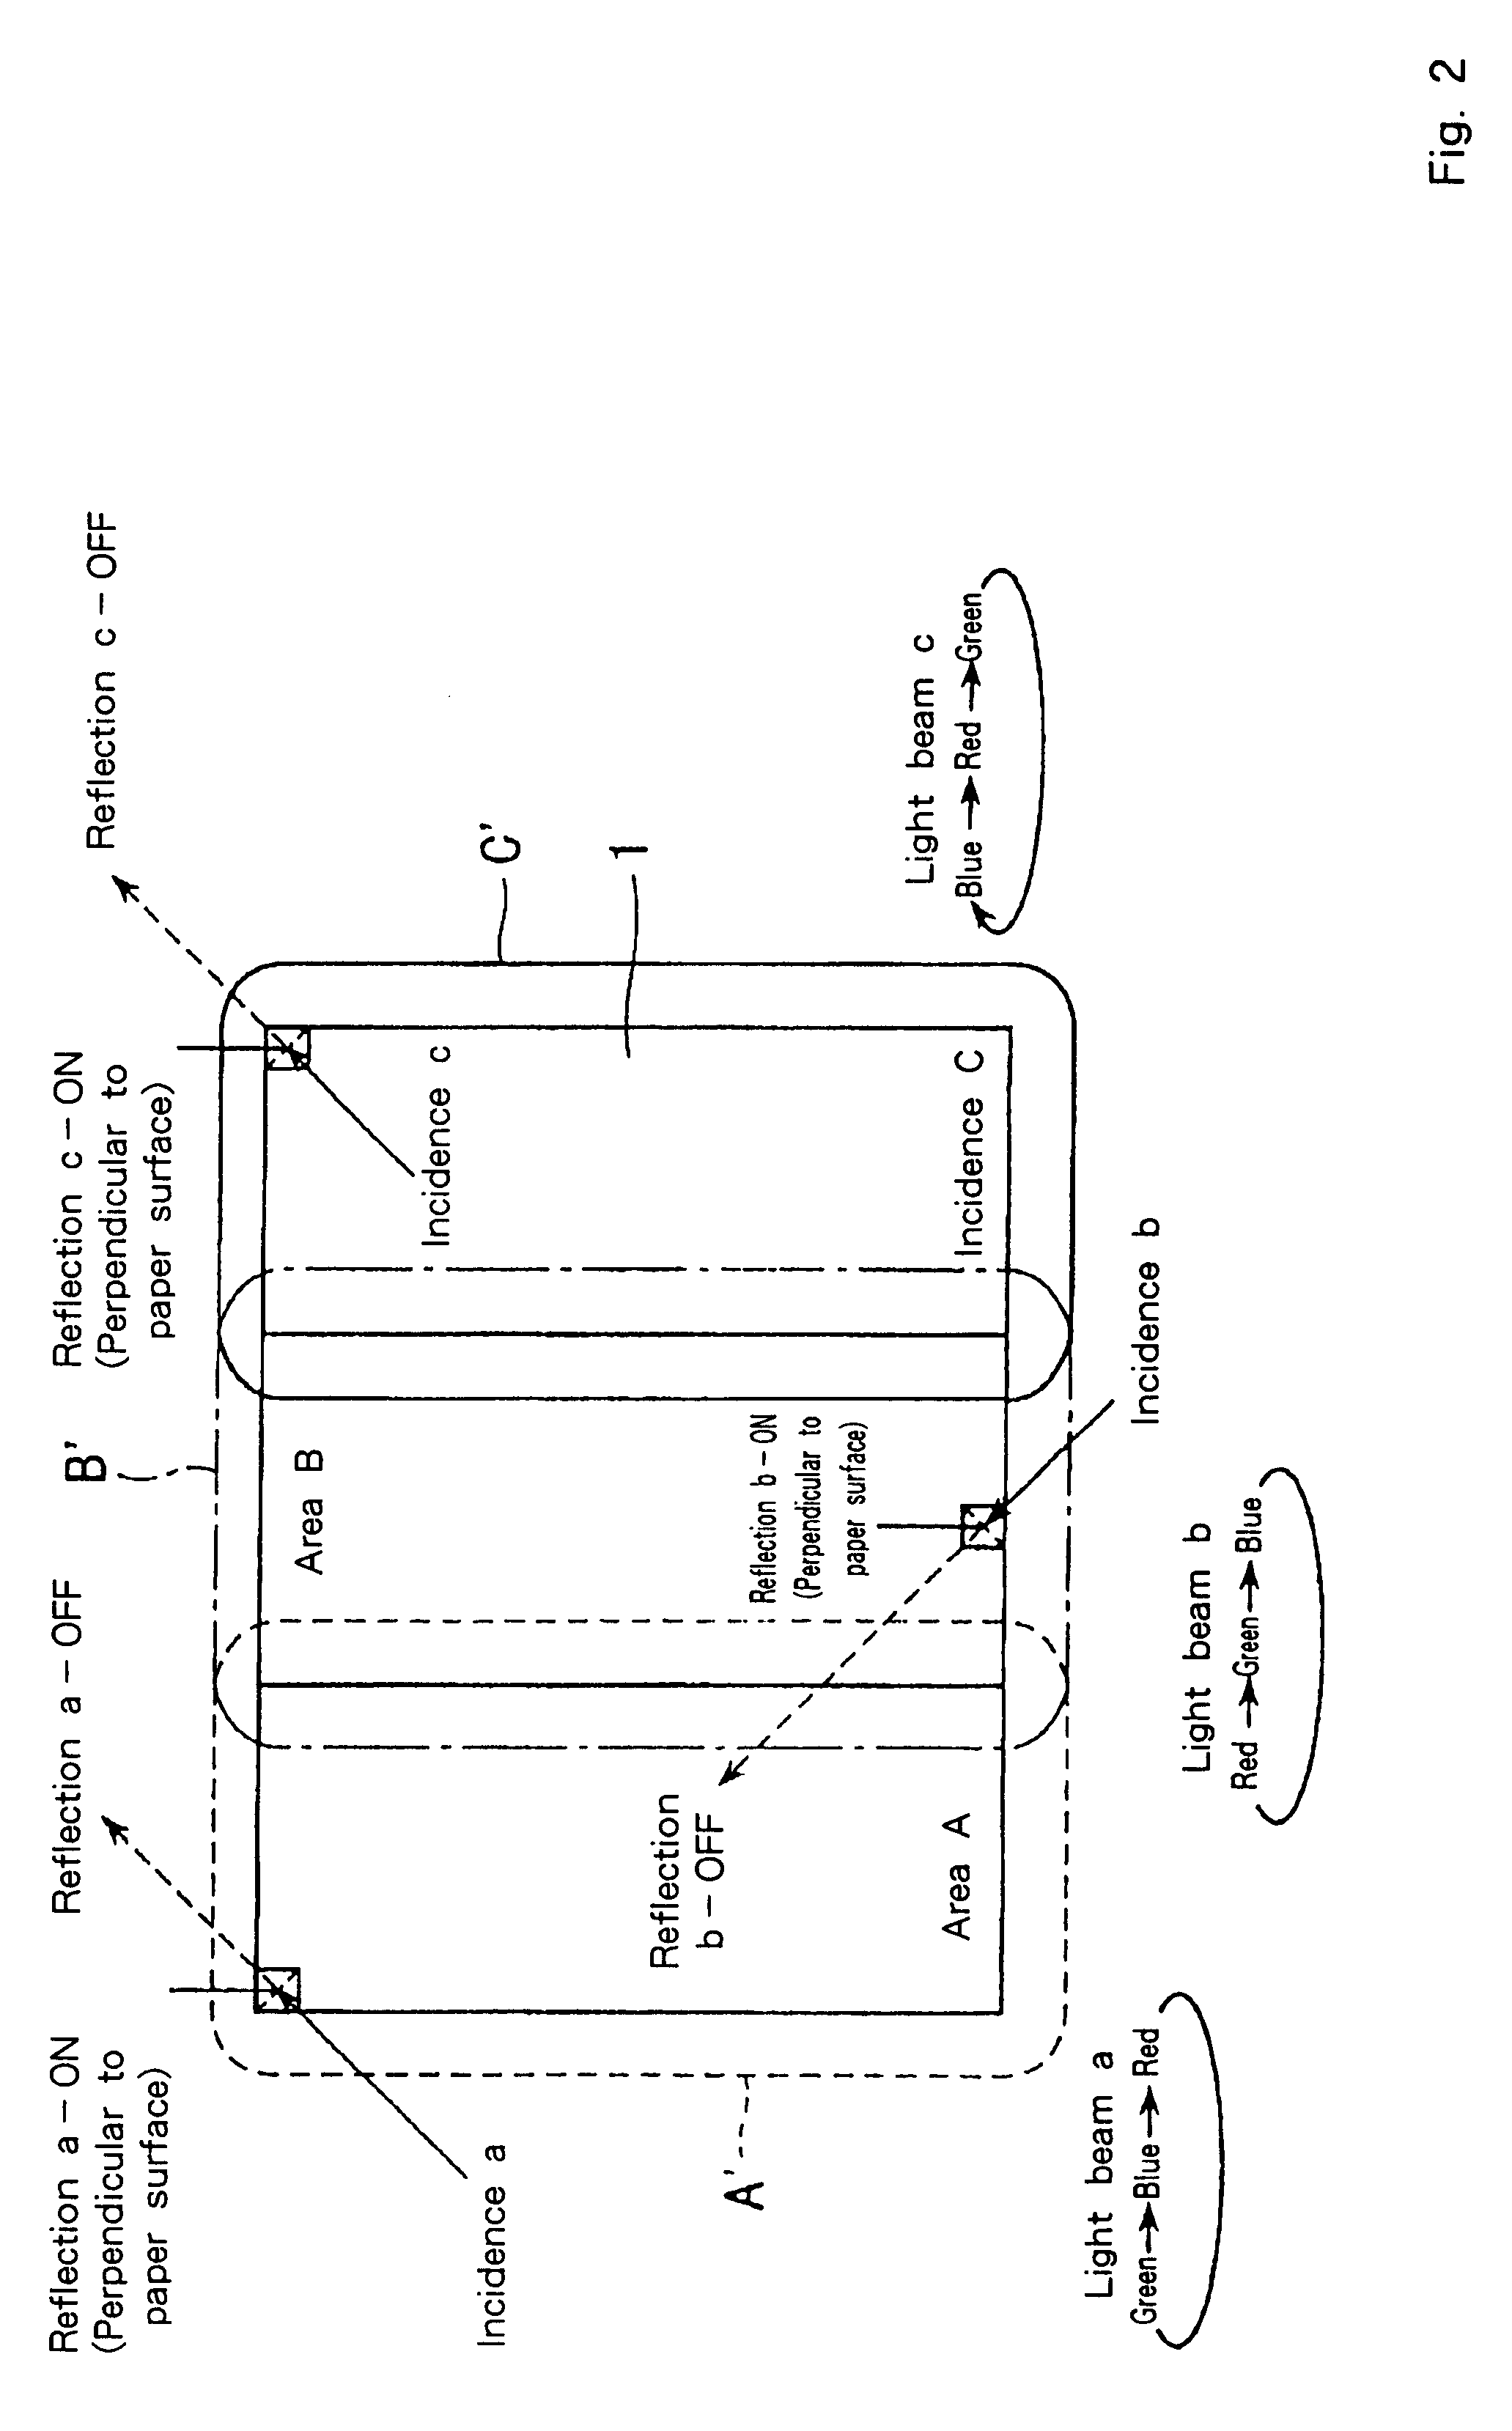 Digital micro mirror device and single-panel color projector using it